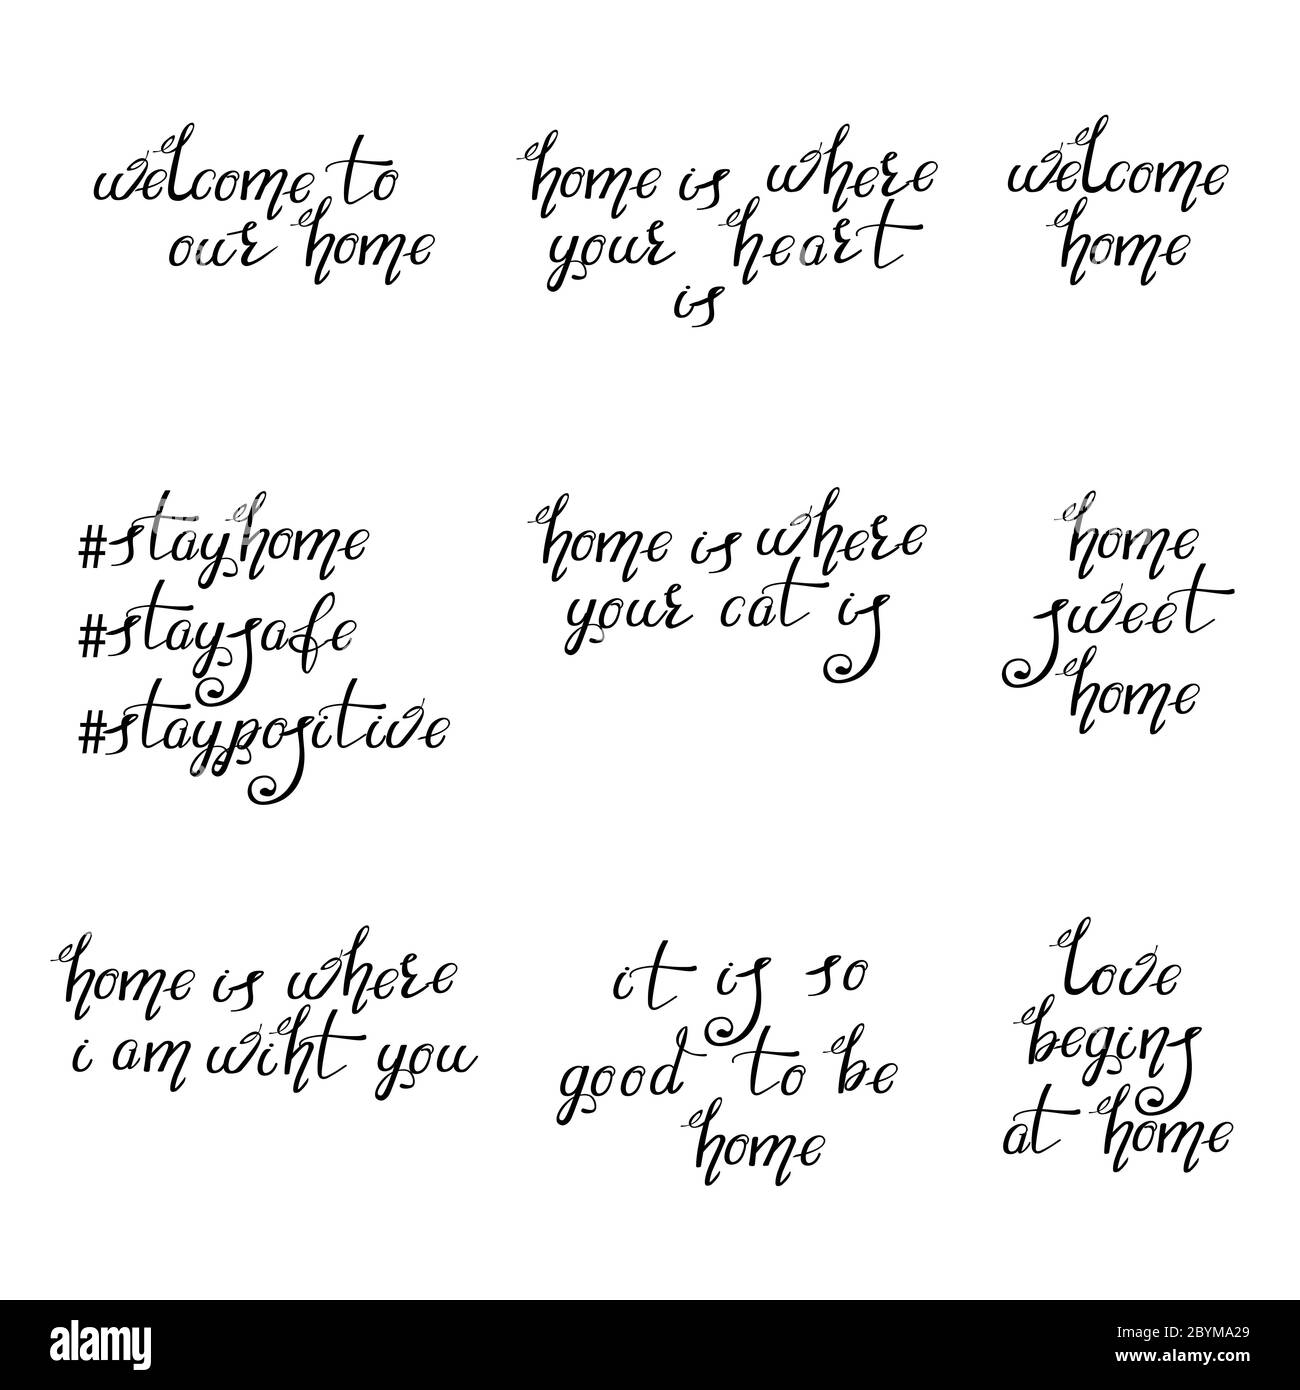 Lettering Typography Poster. Calligraphic Quotes for Posters, Home decorations, Cards. Motivational Hand Written Sign Stock Photo